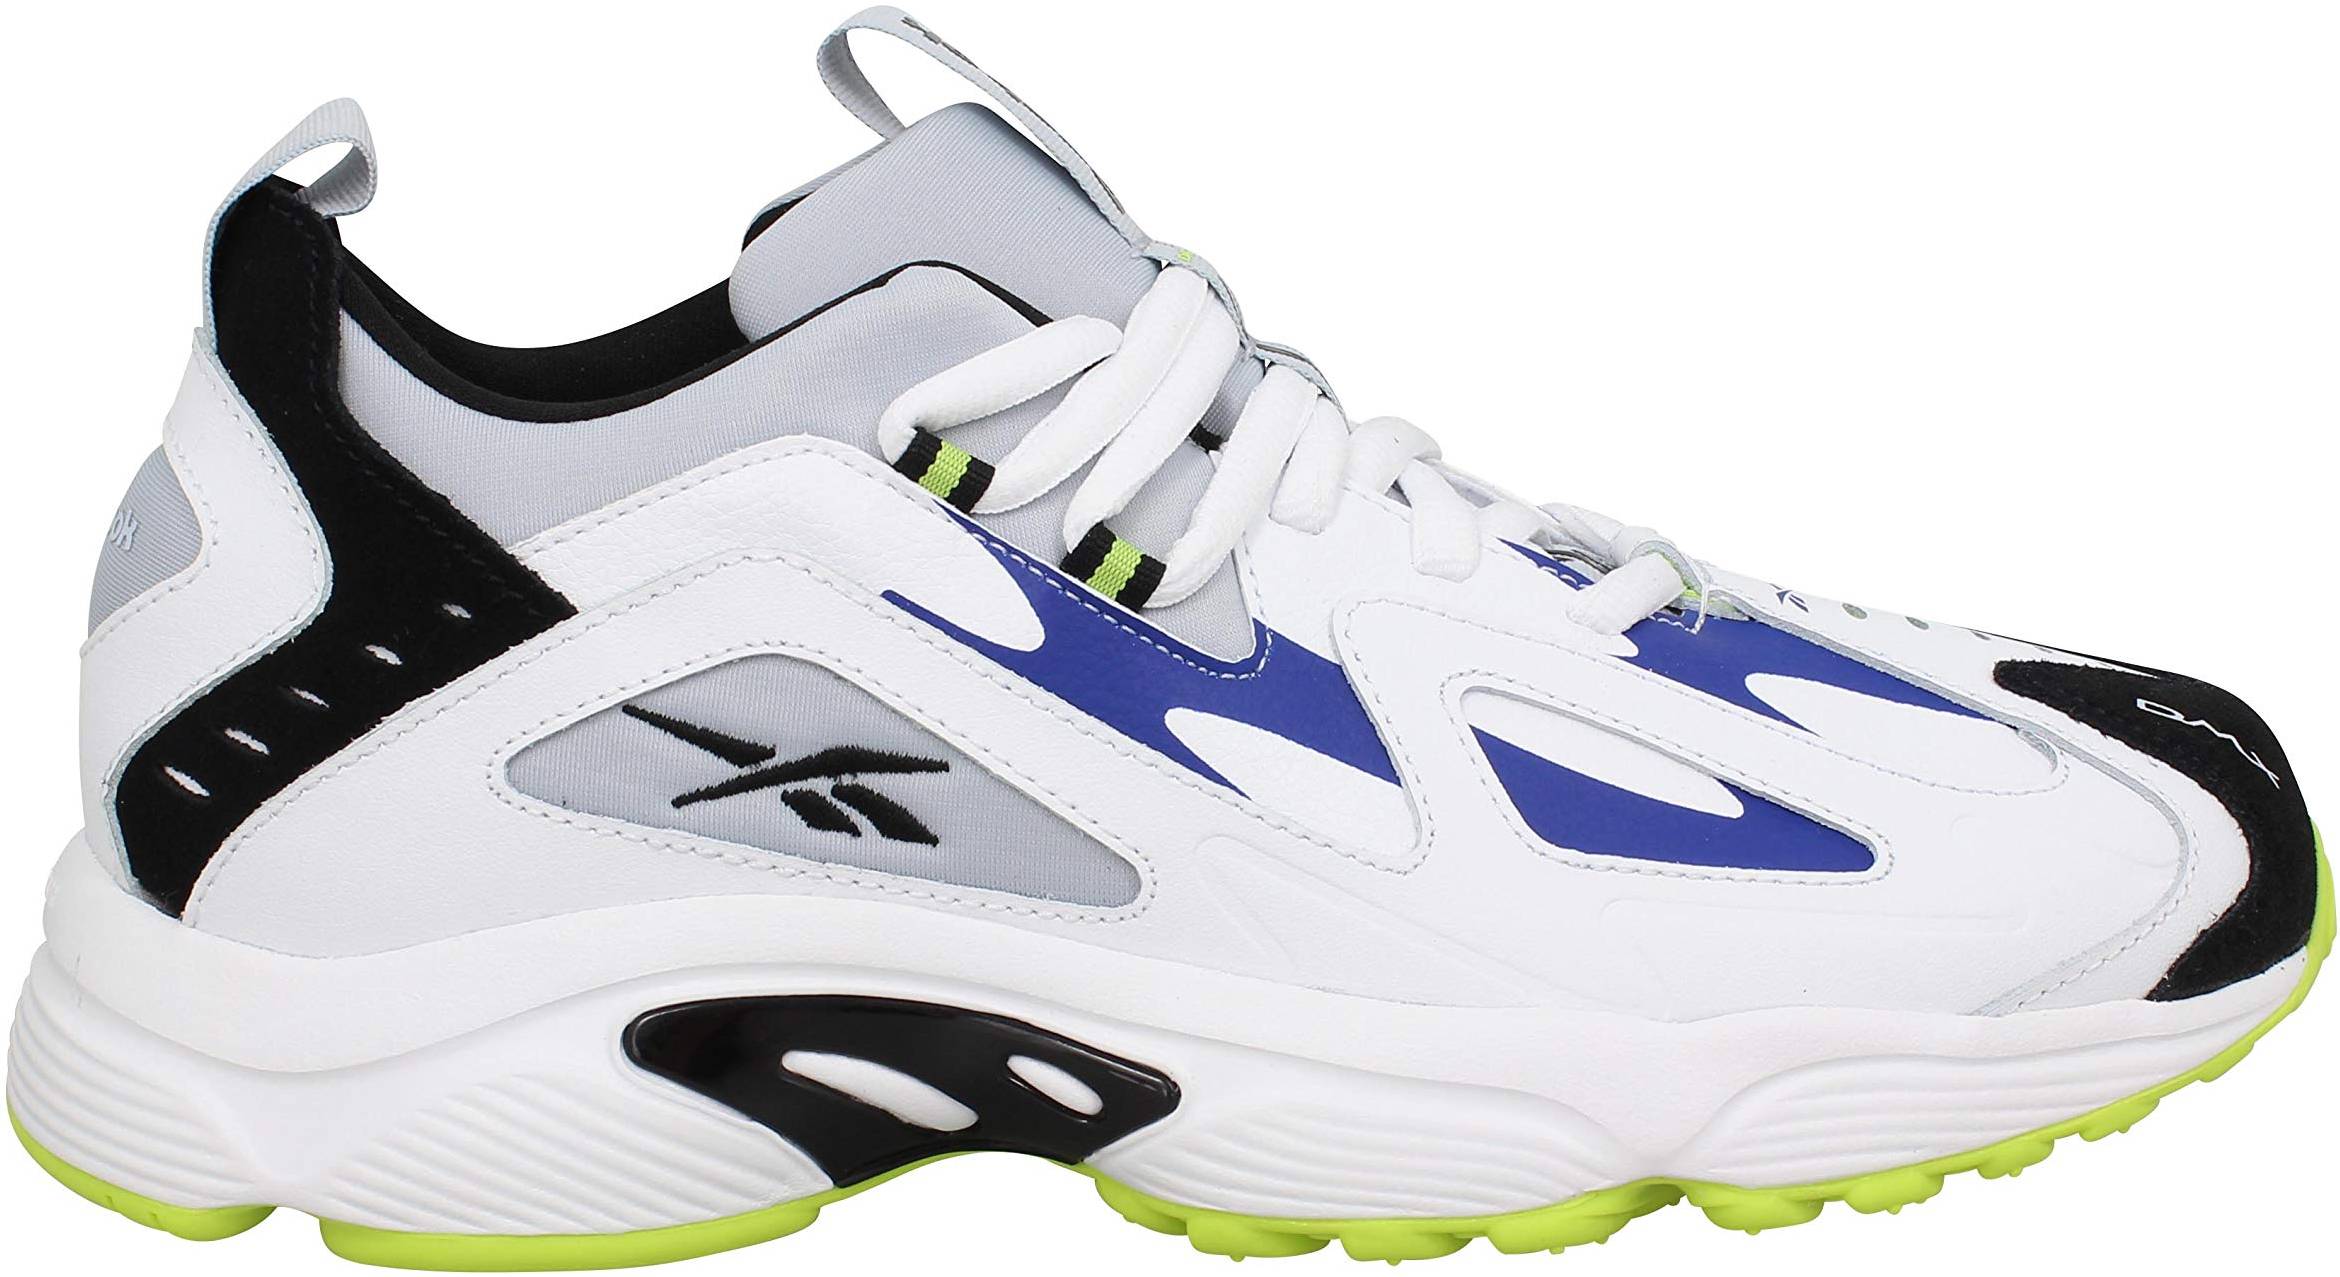 Only $80 + Review of Reebok DMX Series 1200 | RunRepeat